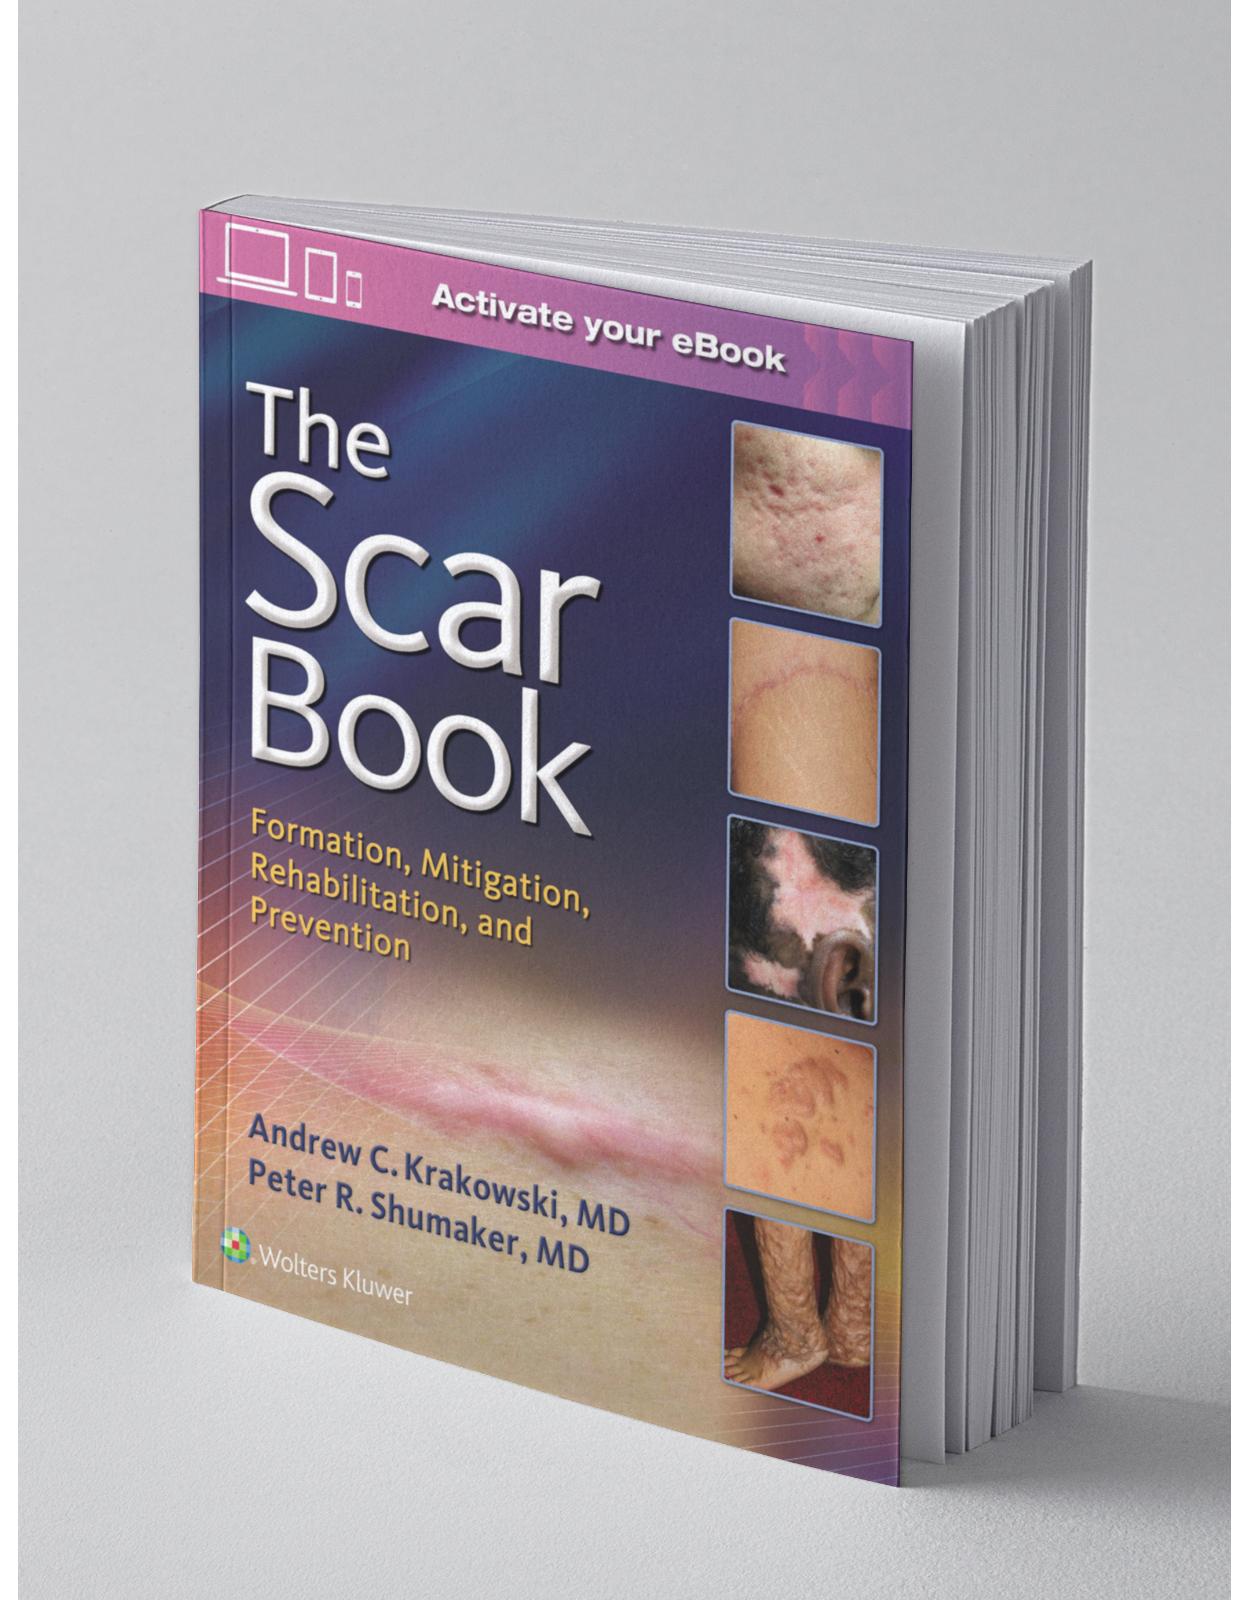 The Scar Book: Formation, Mitigation, Rehabilitation and Prevention